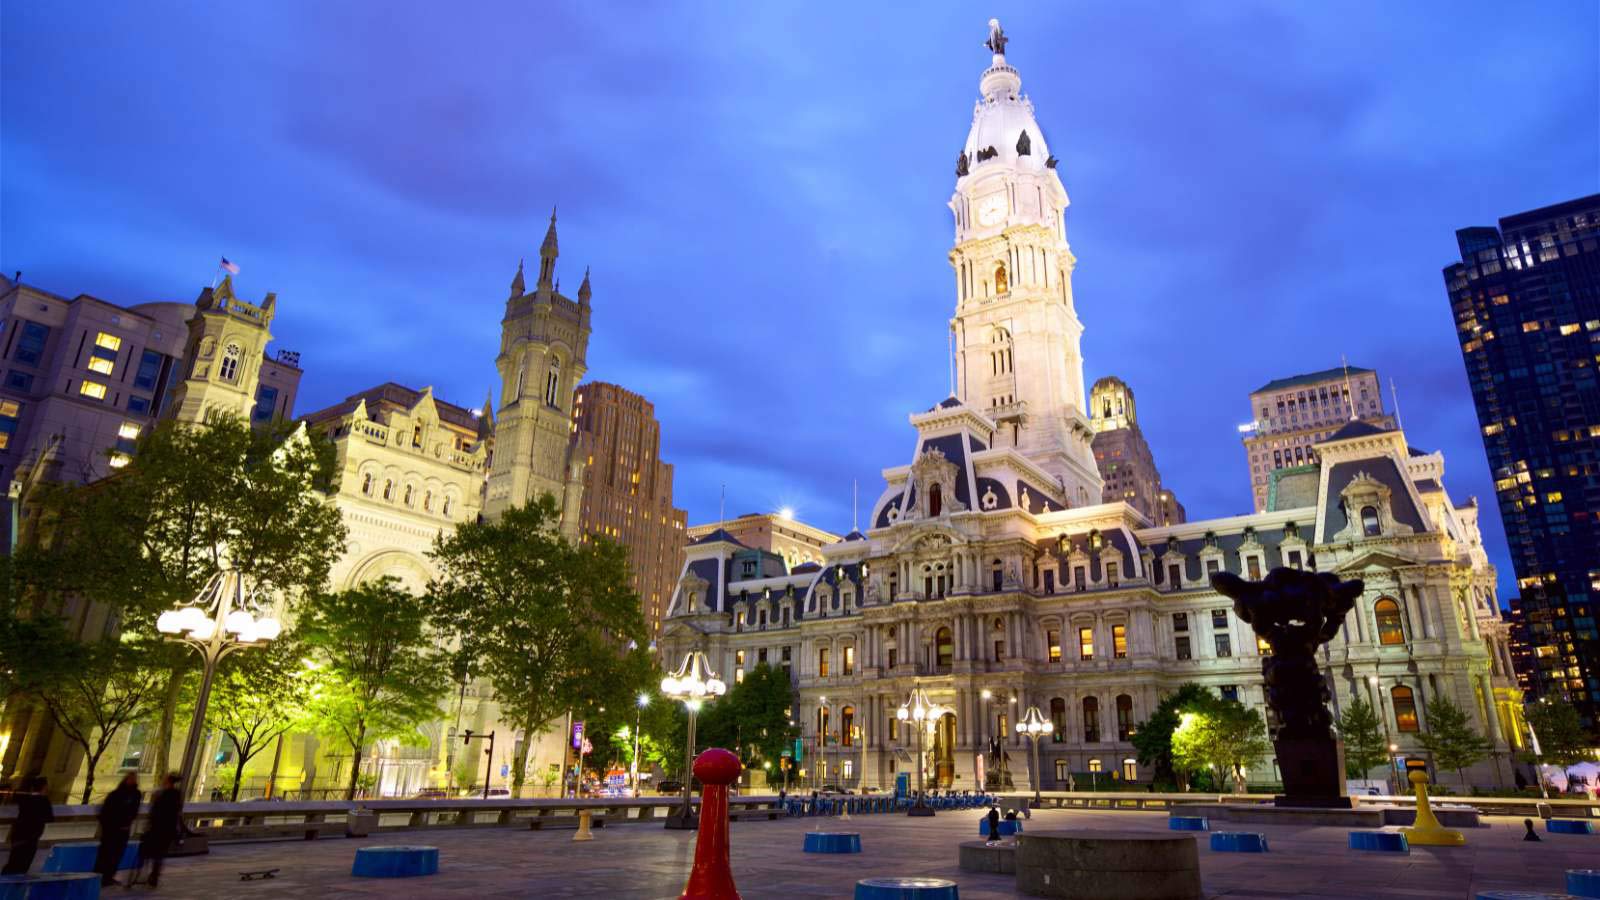 <p>Philadelphia City Hall doesn’t look like it belongs in the United States, it looks like a 17th-century European building. It’s the largest city hall in the country and the tallest masonry-bearing building in the world. There is a lot of history in this building, and it’s definitely worth a visit.</p>